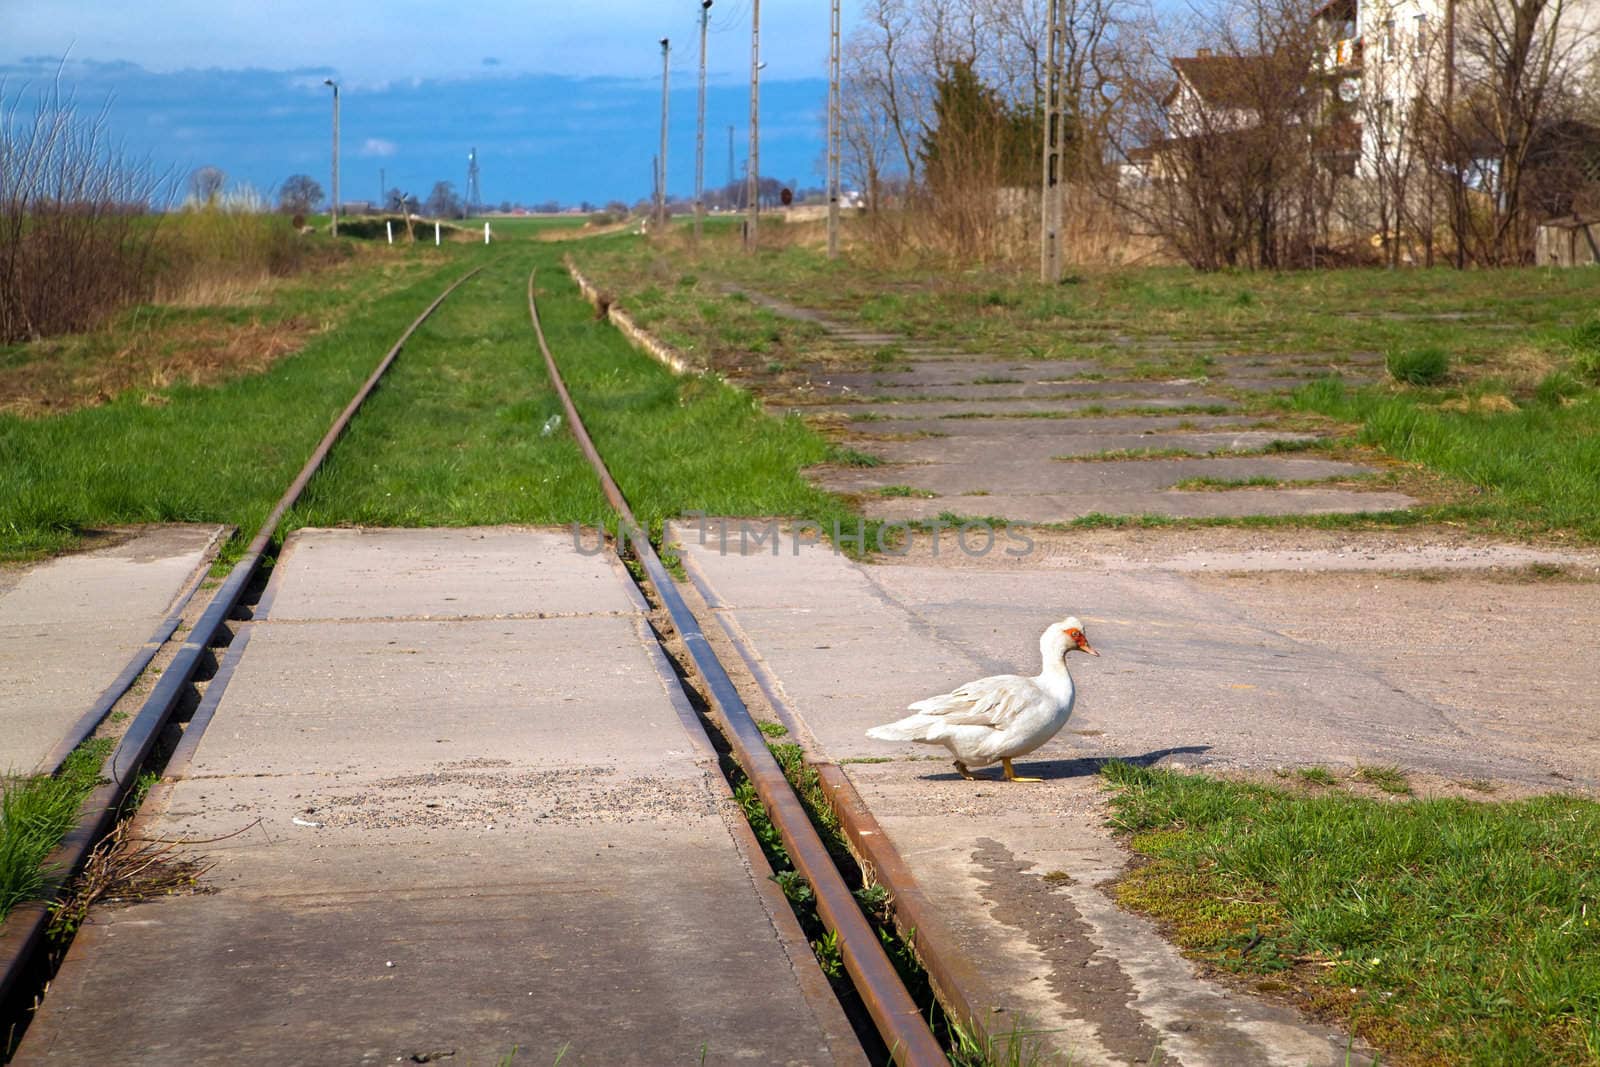 Goose on the track by remik44992